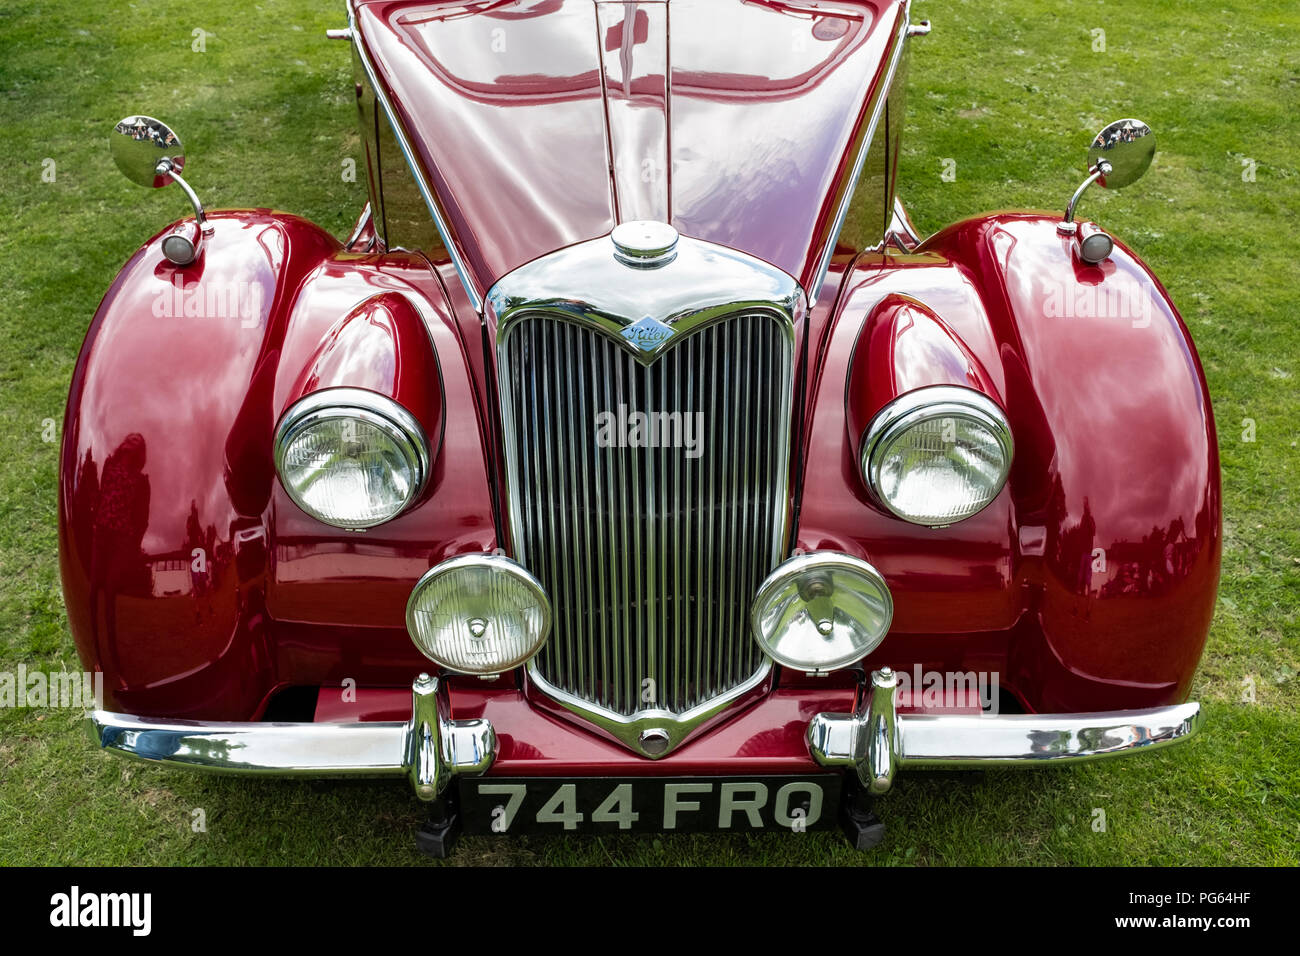 A Red Riley 2.5 litre drophead at a classic car show in Wales. Stock Photo